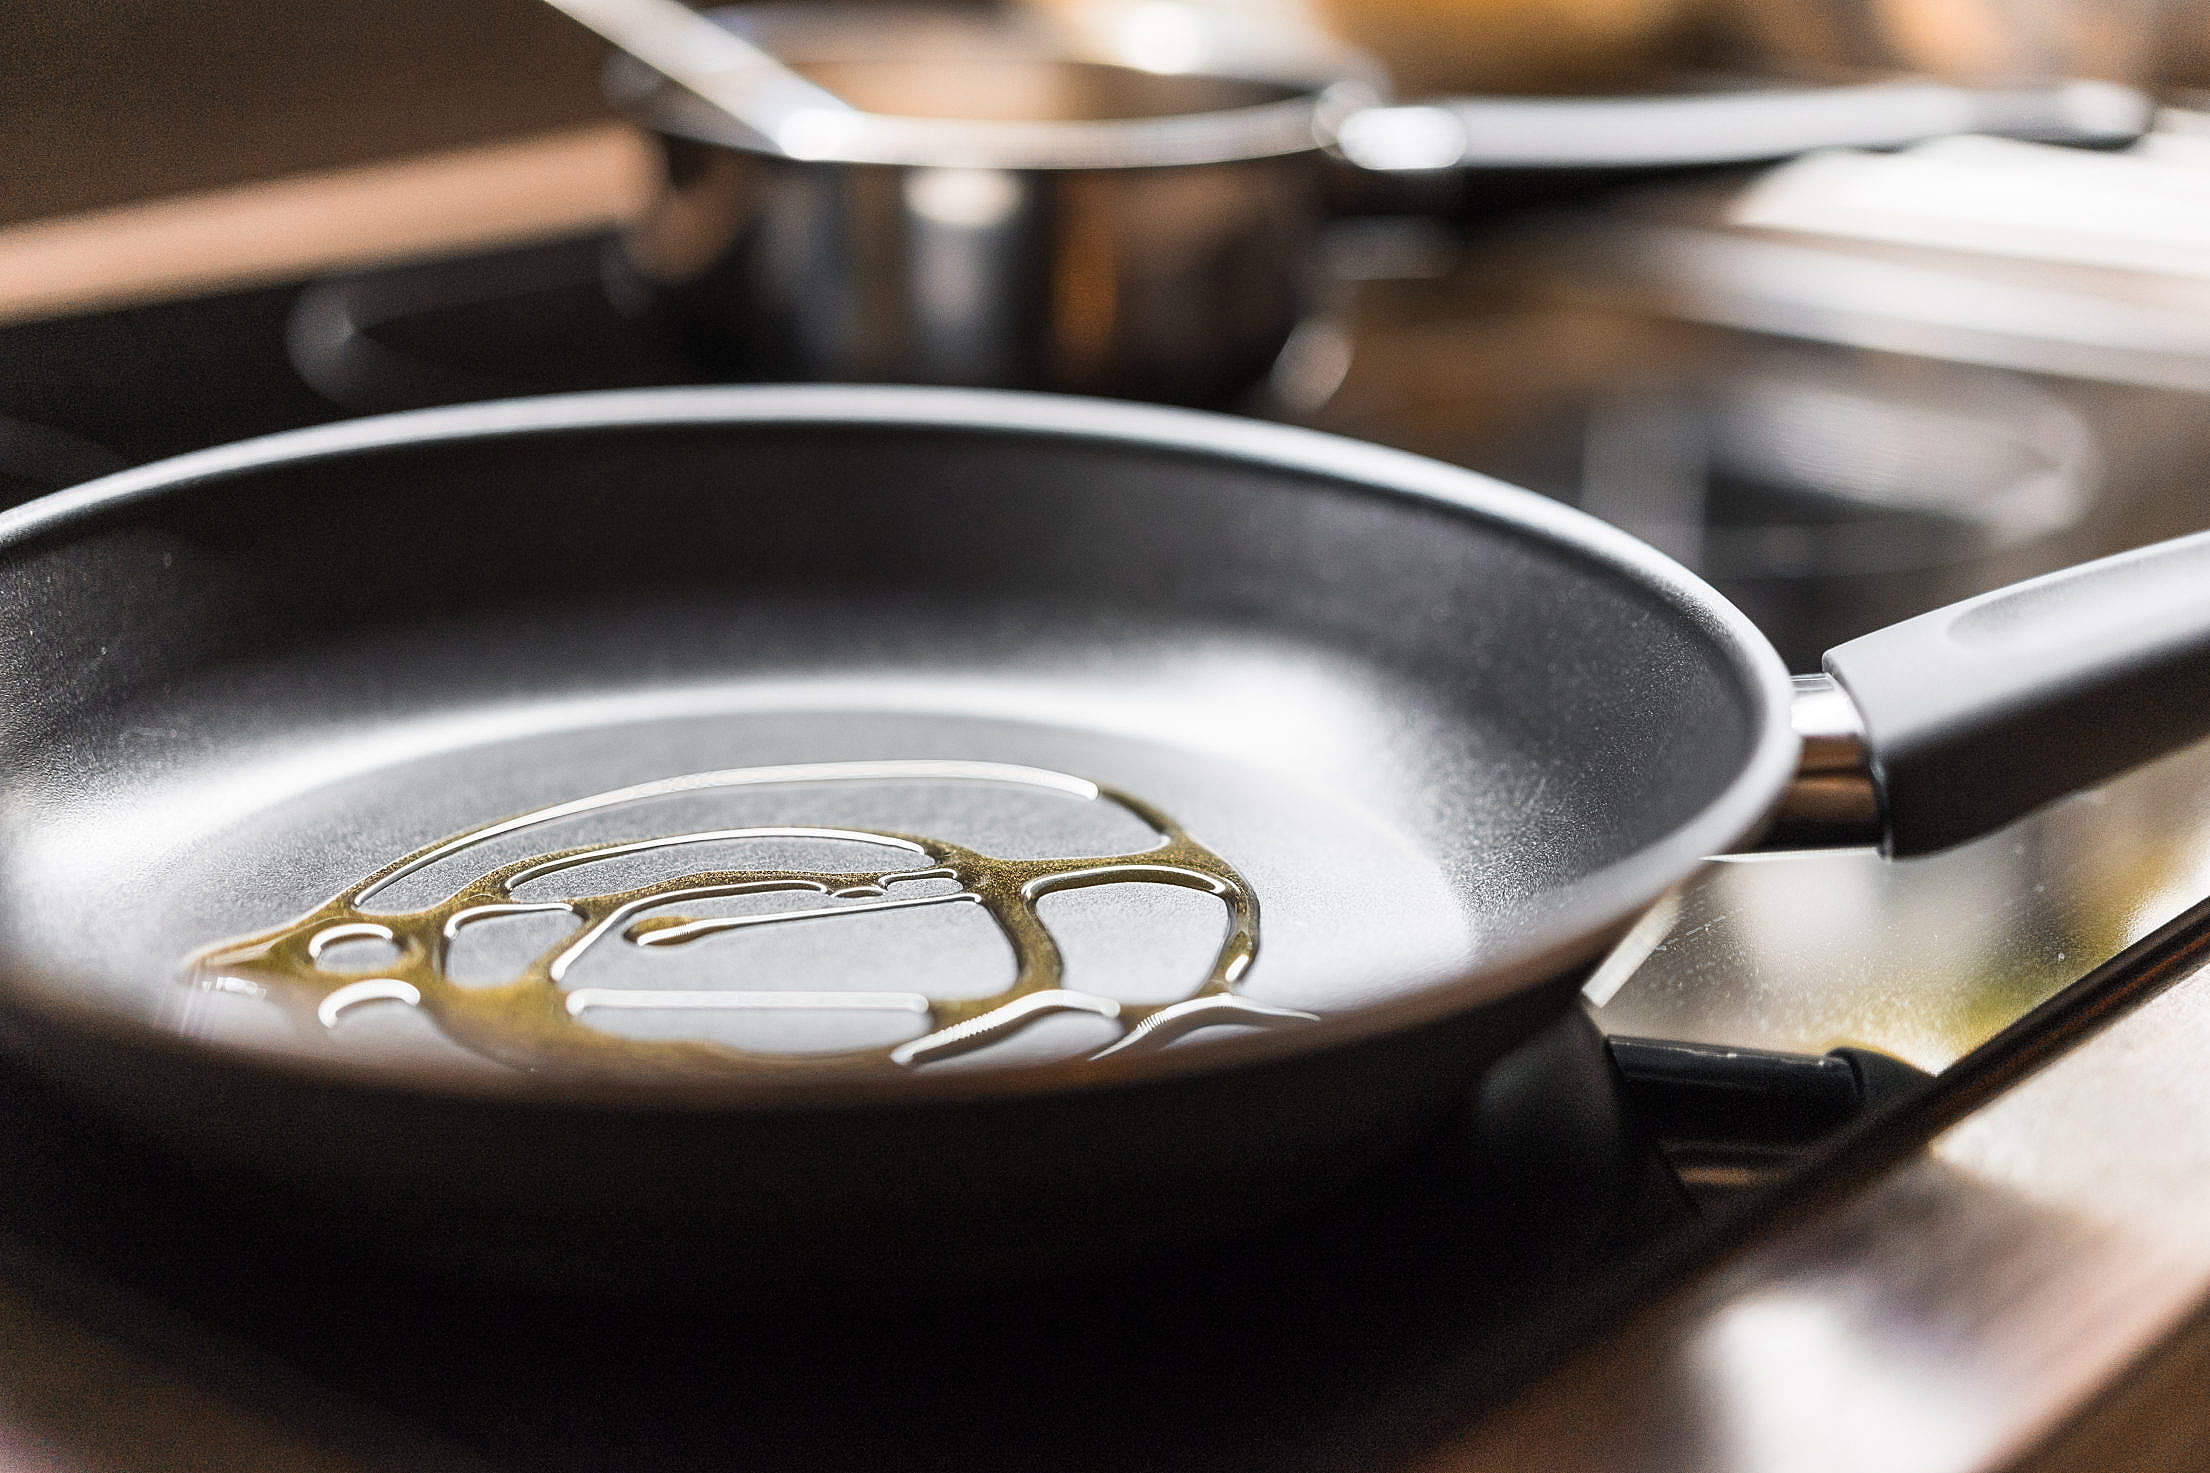 Pan with Olive Oil Ready to Cooking Free Stock Photo